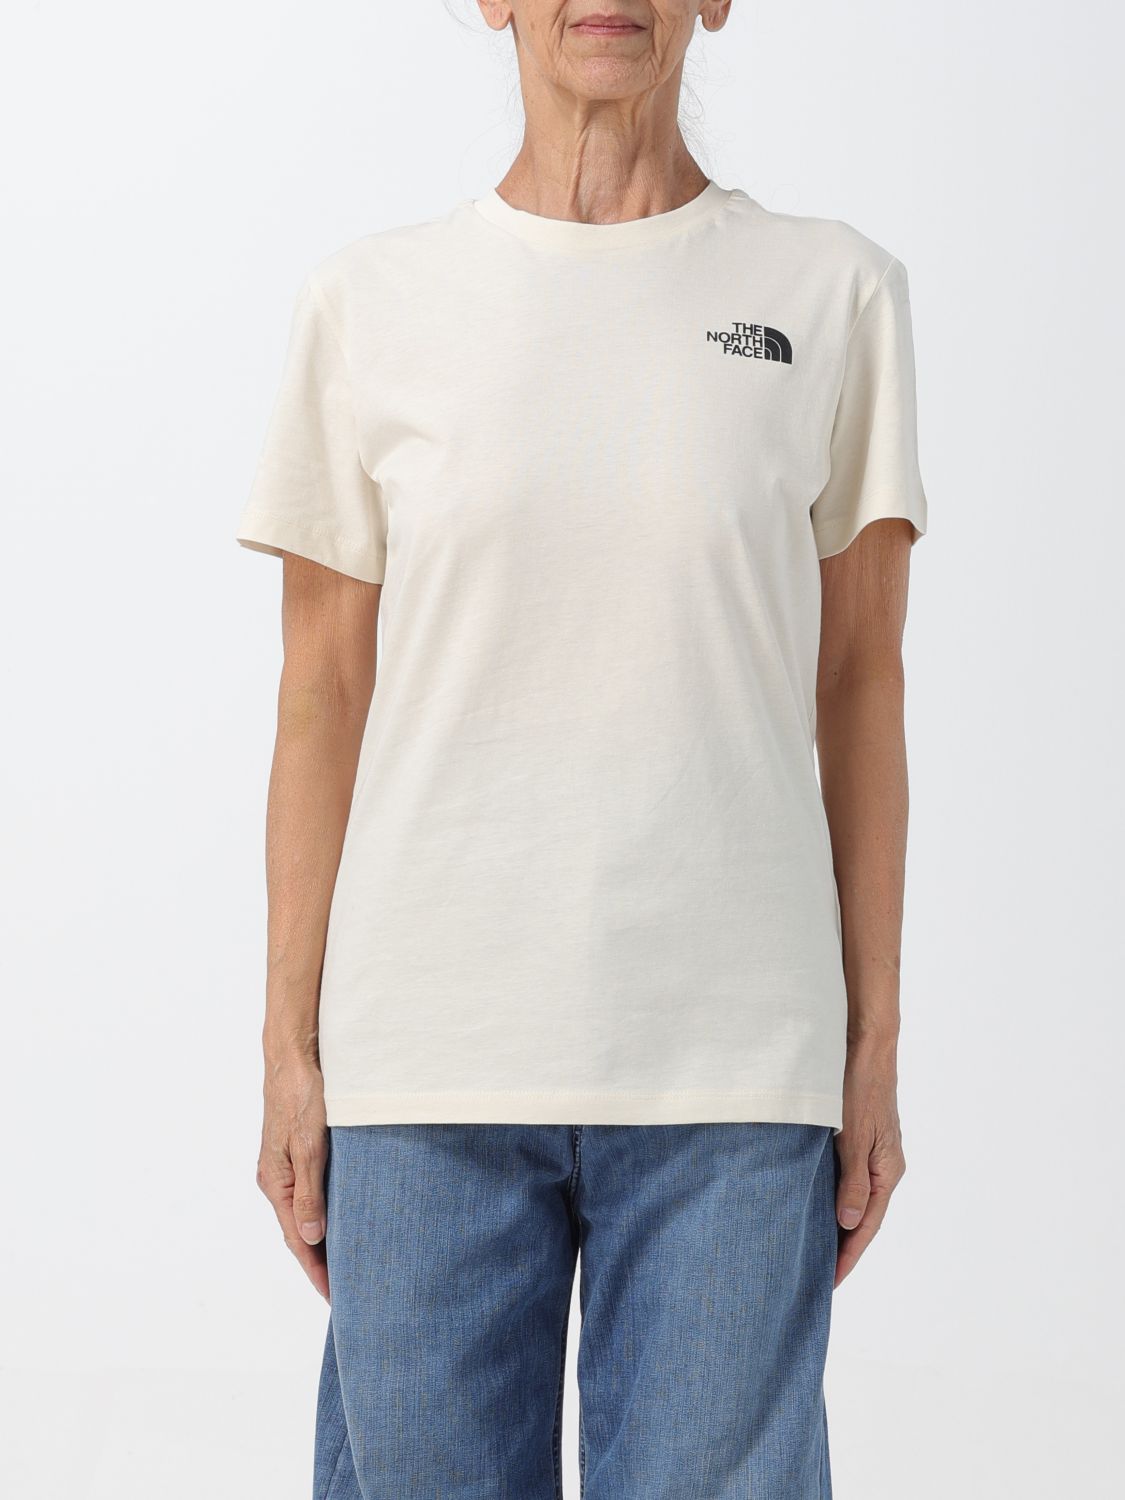 THE NORTH FACE T-SHIRT THE NORTH FACE WOMAN COLOR WHITE,F28844001